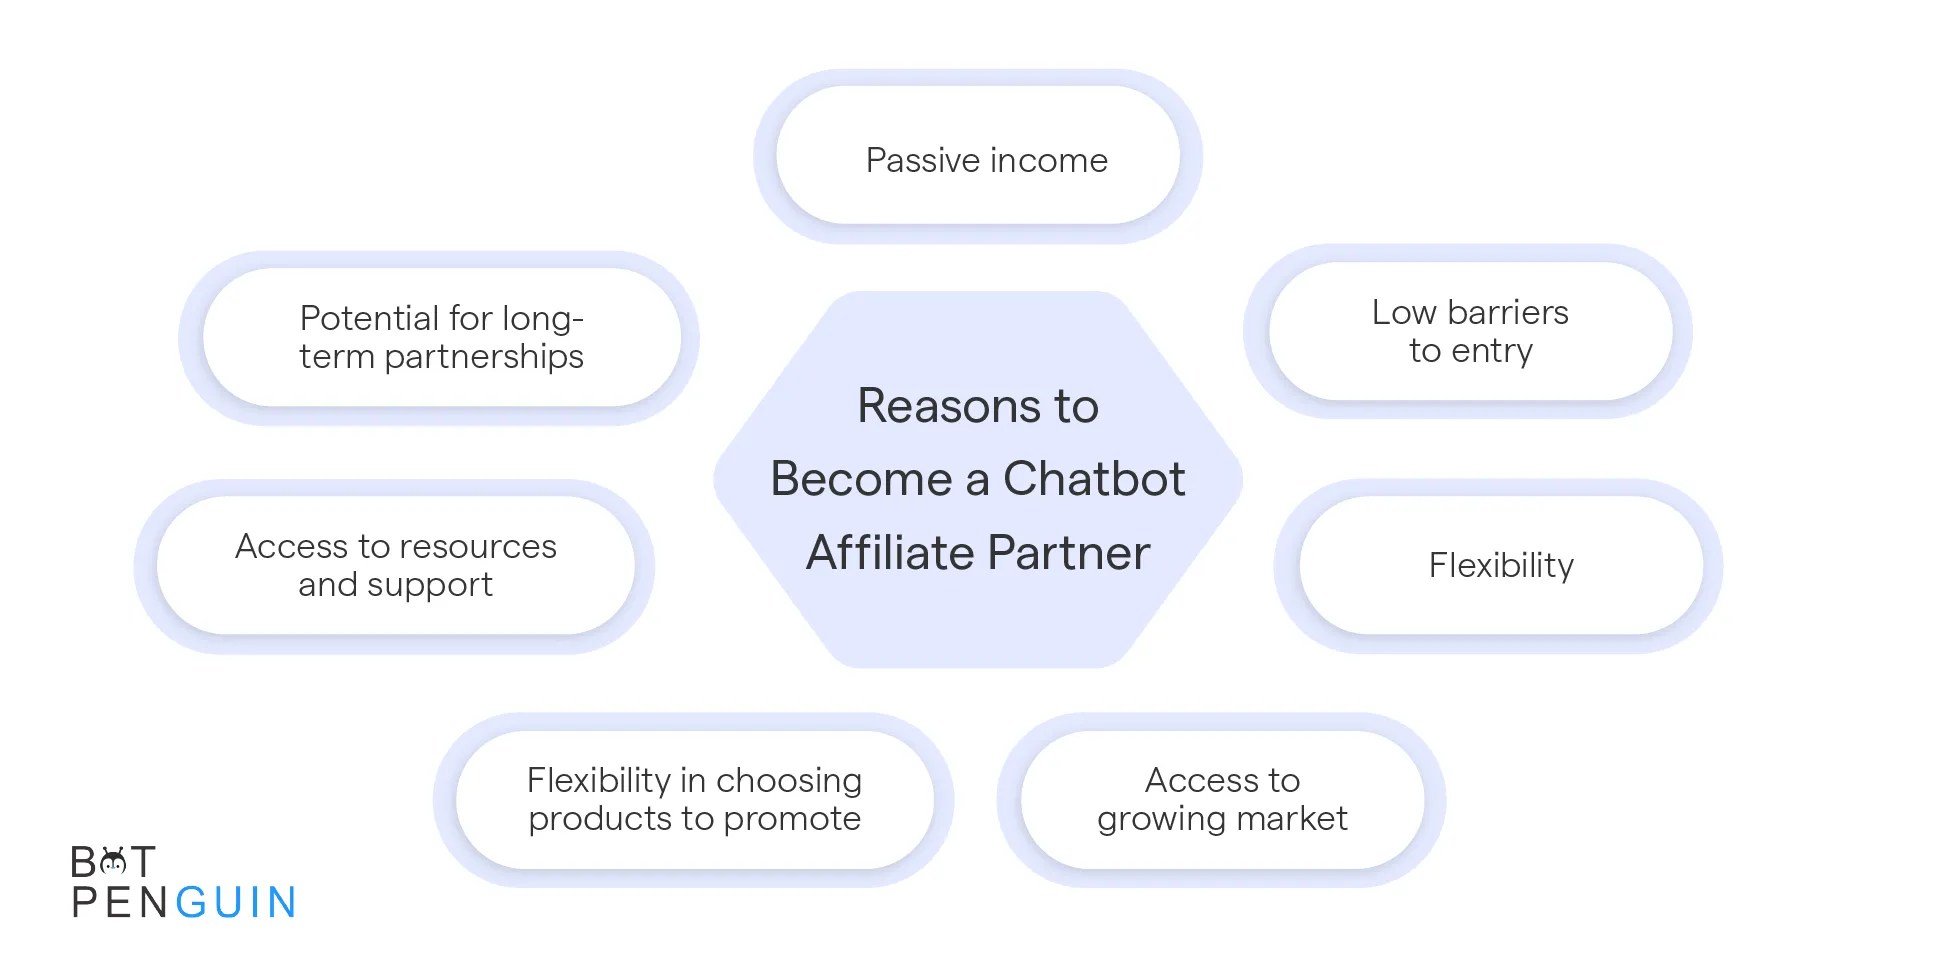 What are the advantages of working as a chatbot affiliate partner